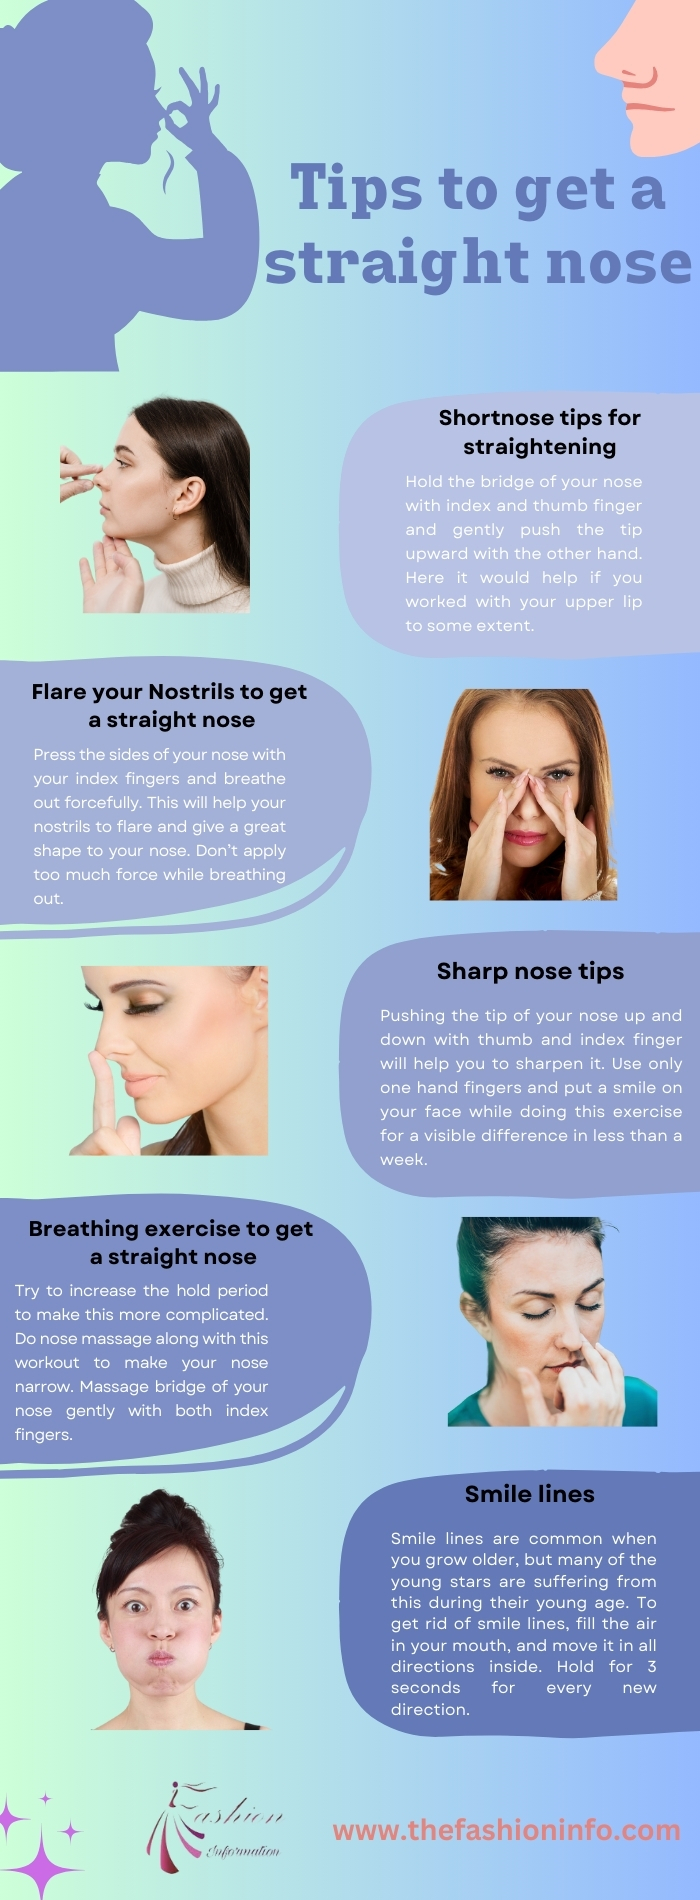 Tips to get a straight nose